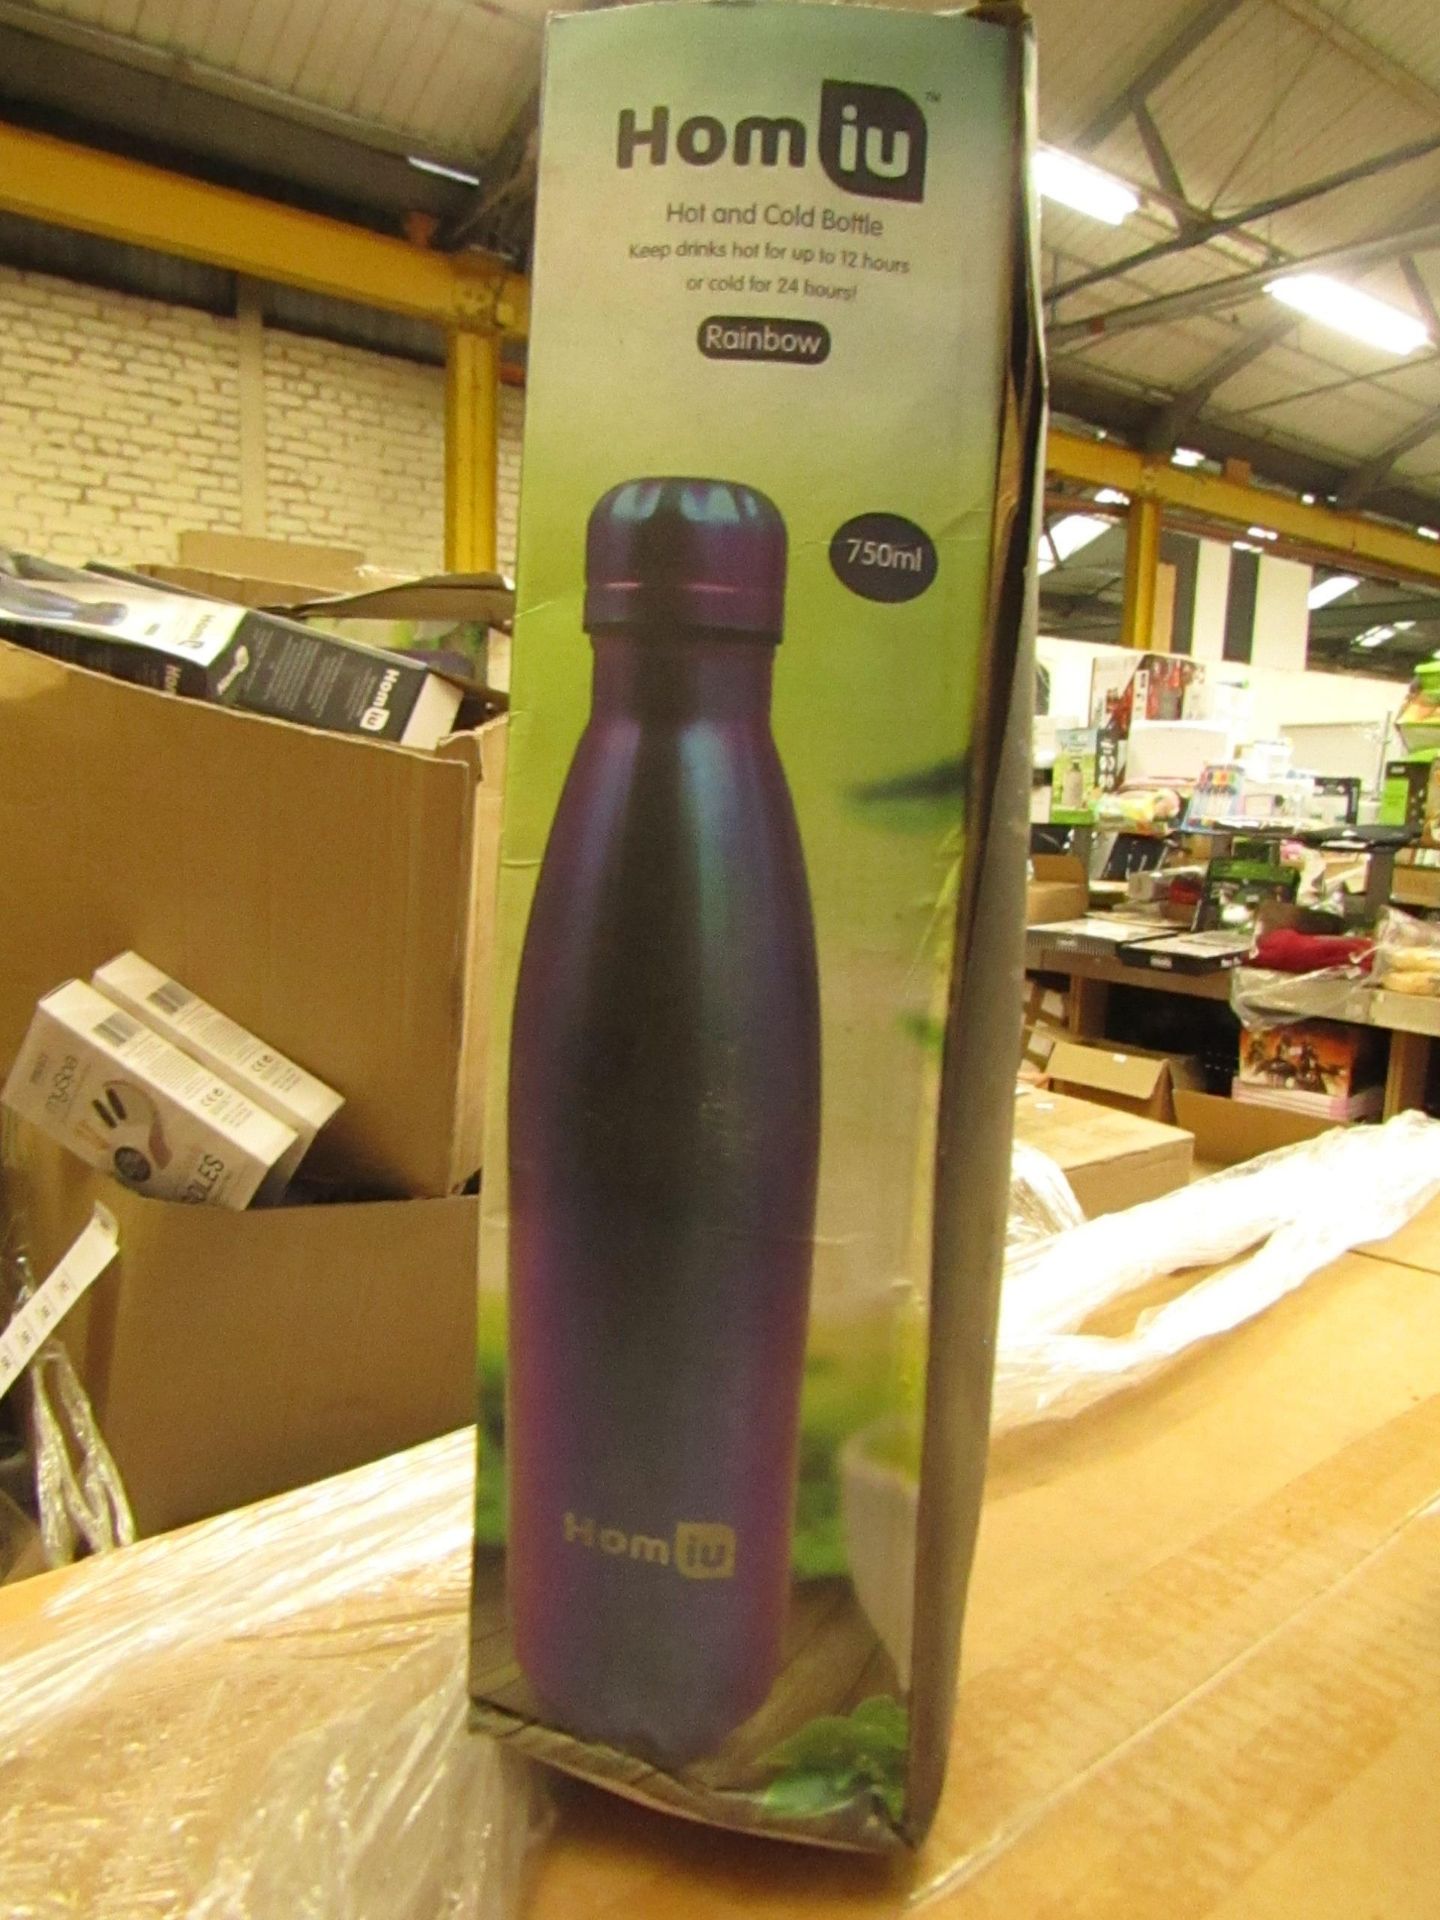 2x 750ml Hot and cold bottle, unused but in water damged packaging